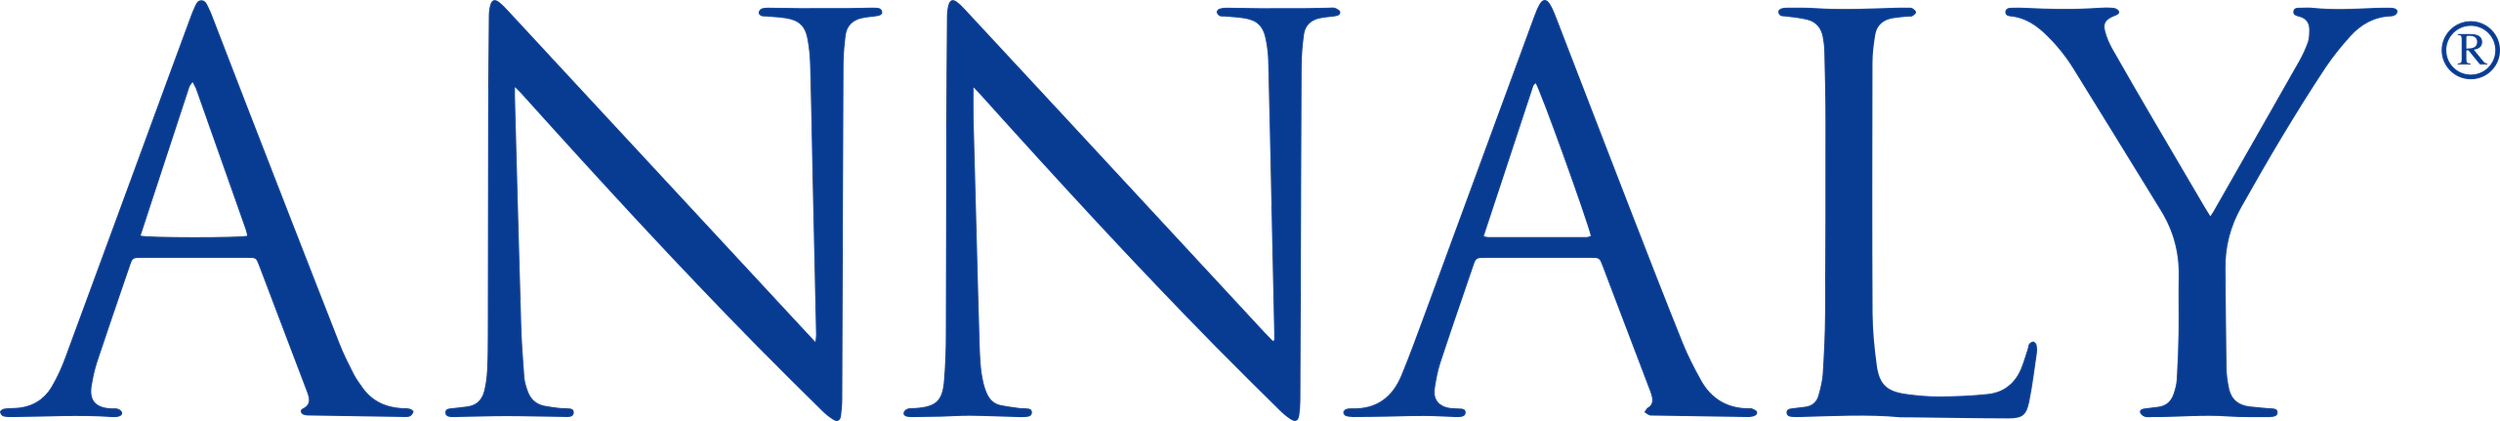 Logo_Annaly.png